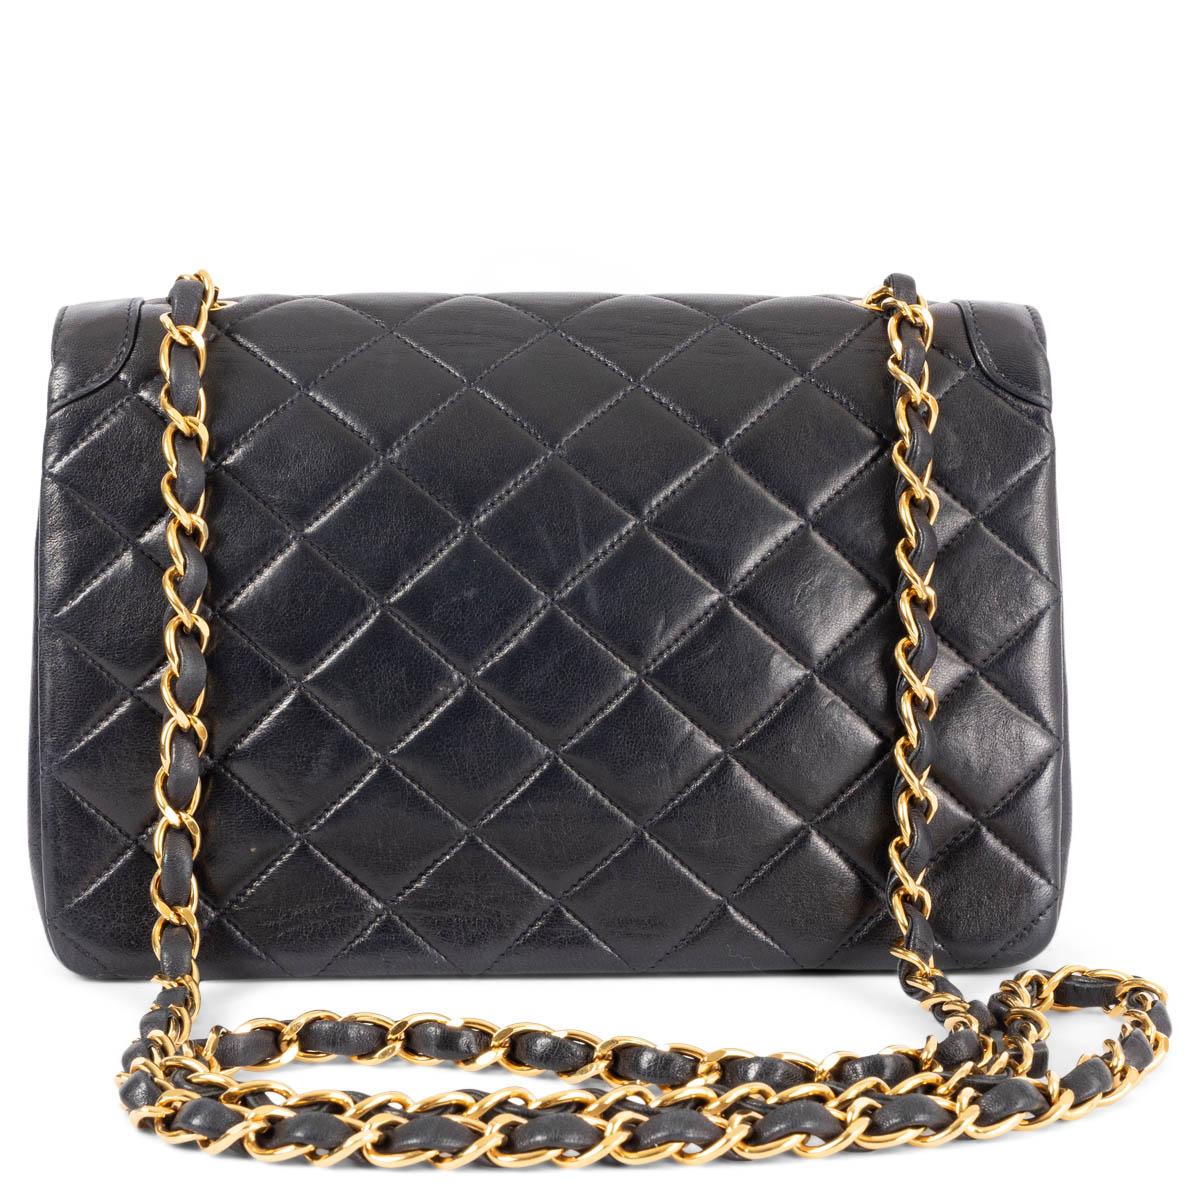 Women's CHANEL midnight blue leather 1994 - 96 QUILTED FLAP Shoulder Bag